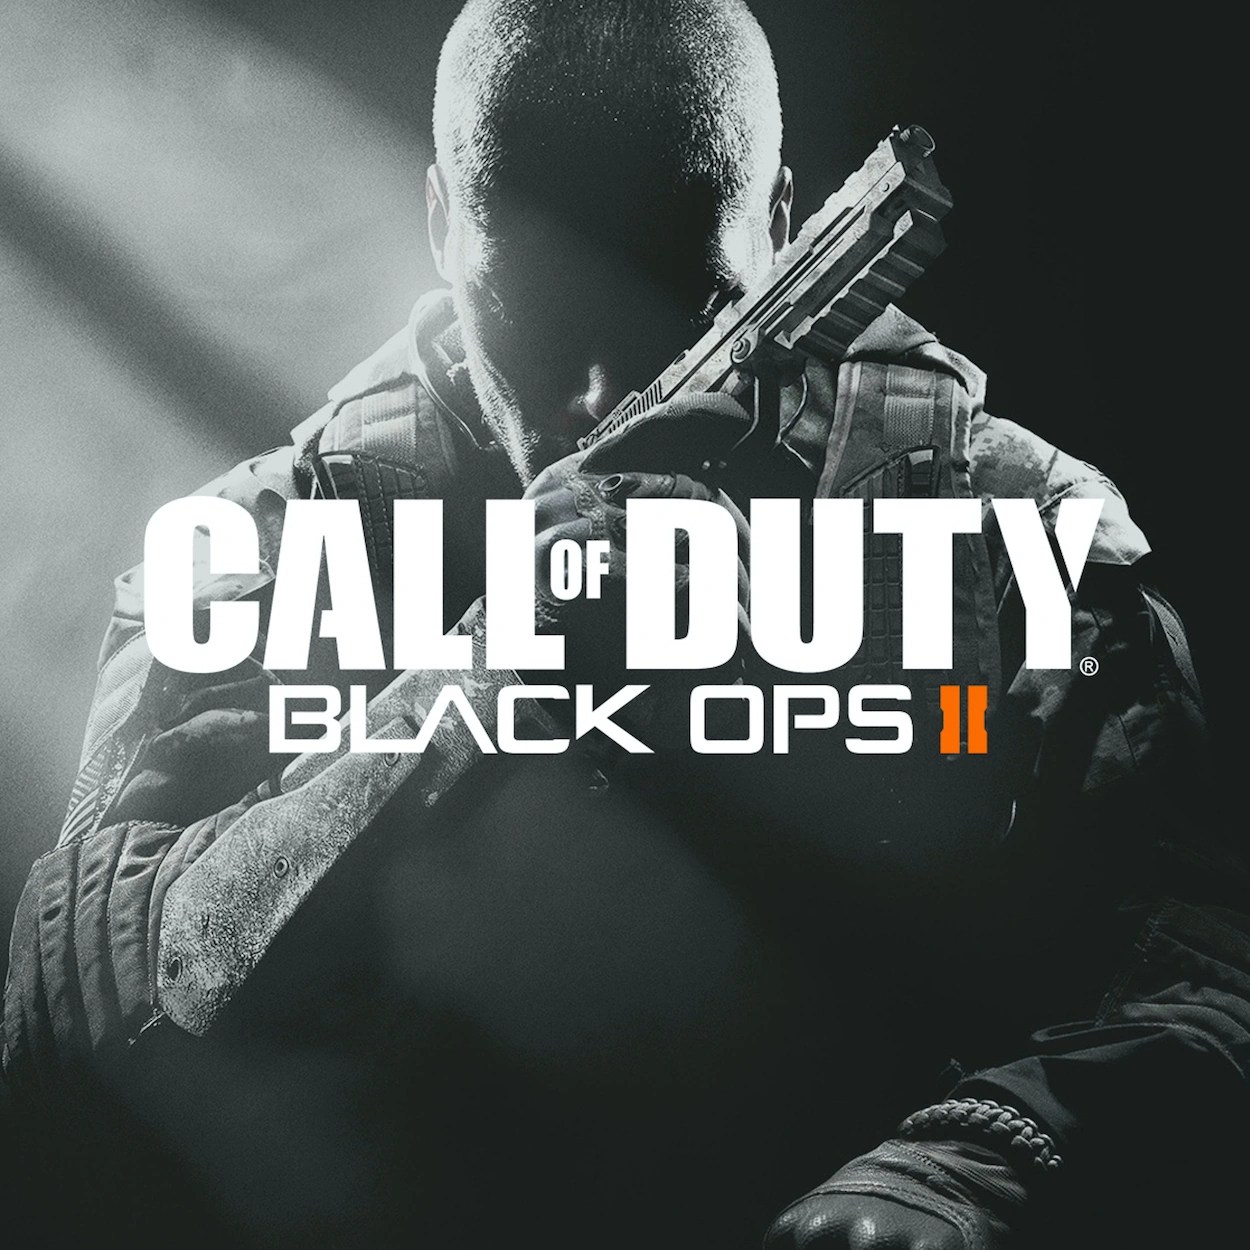 Call of duty black ops 1 2